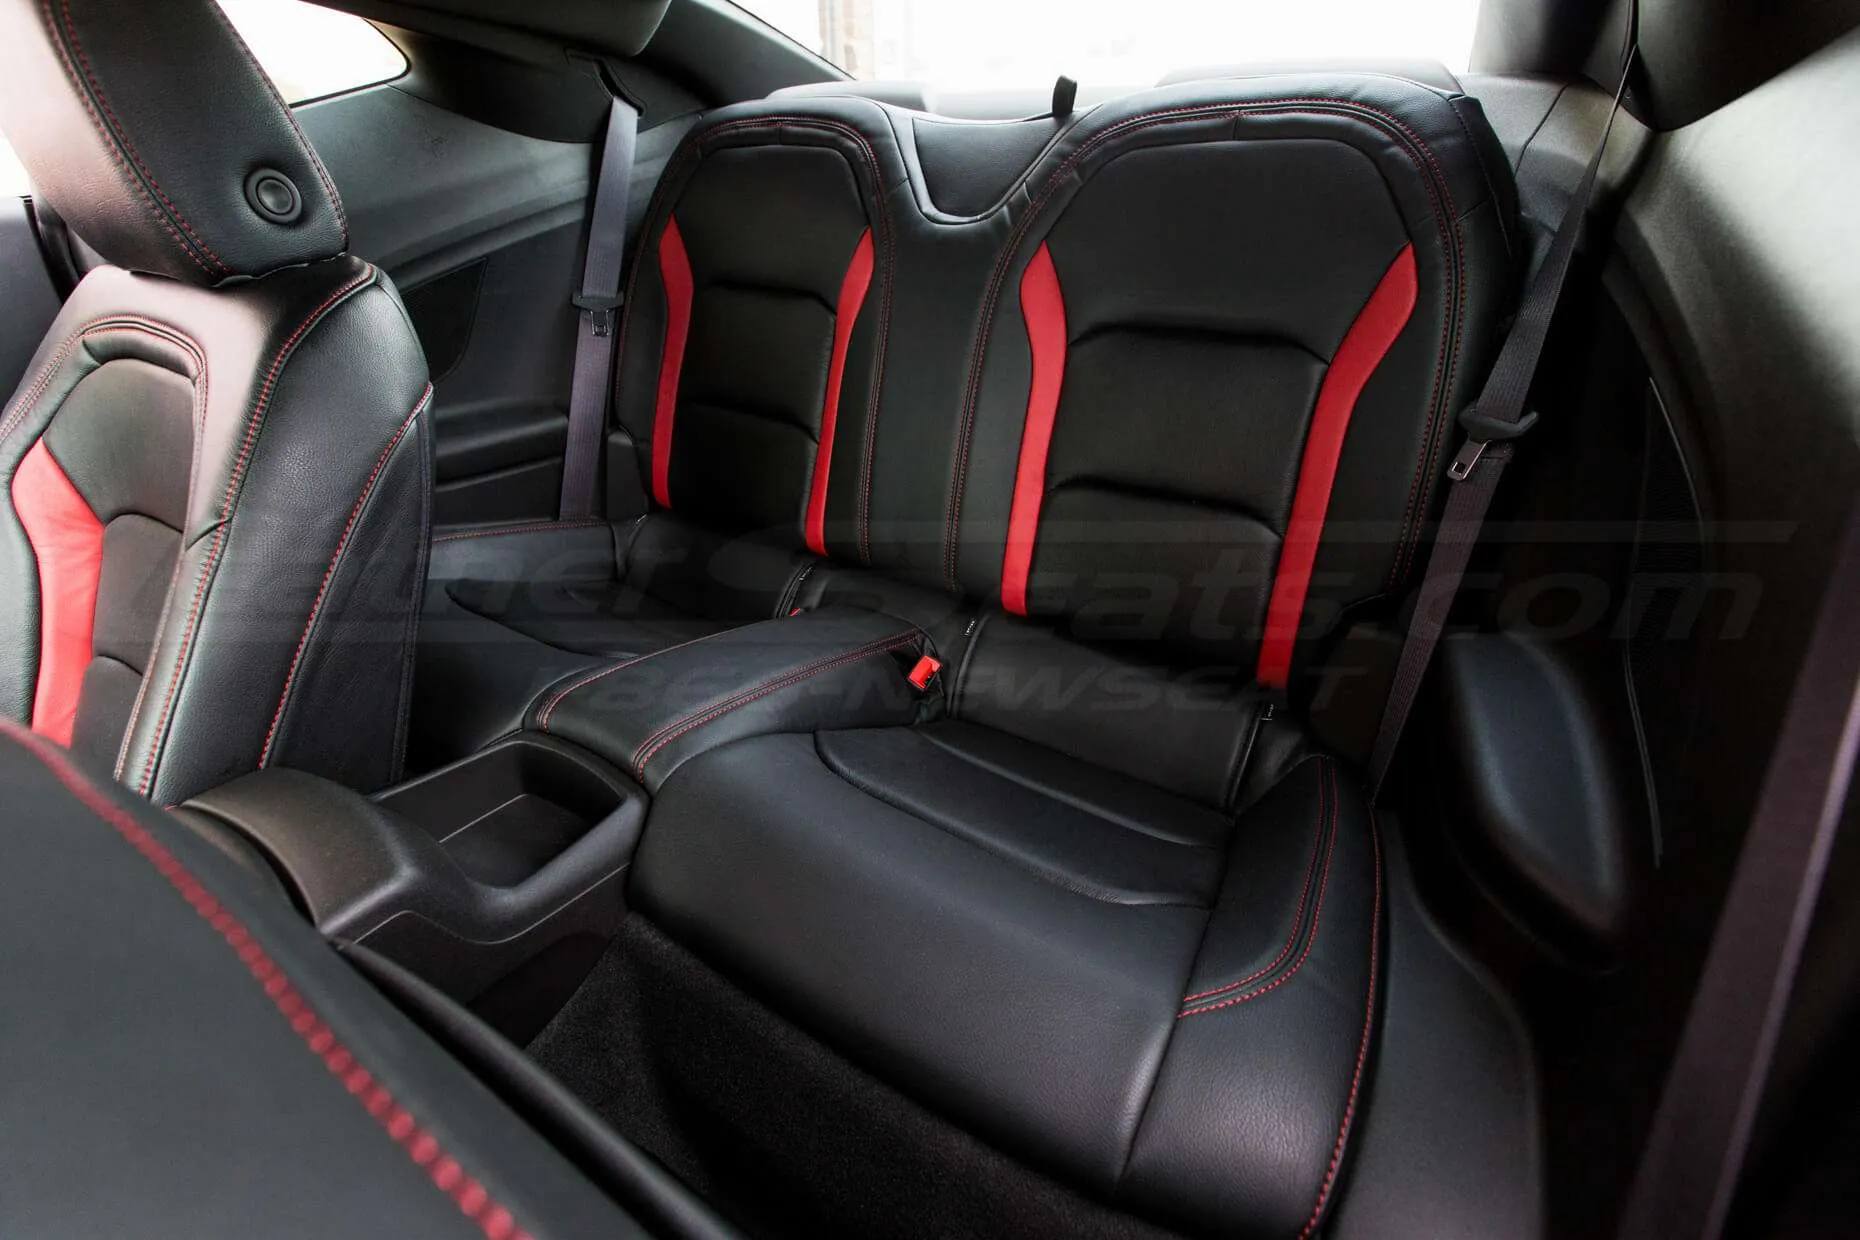 Chevy Camaro Leather Seats - Rear seats from driver's side